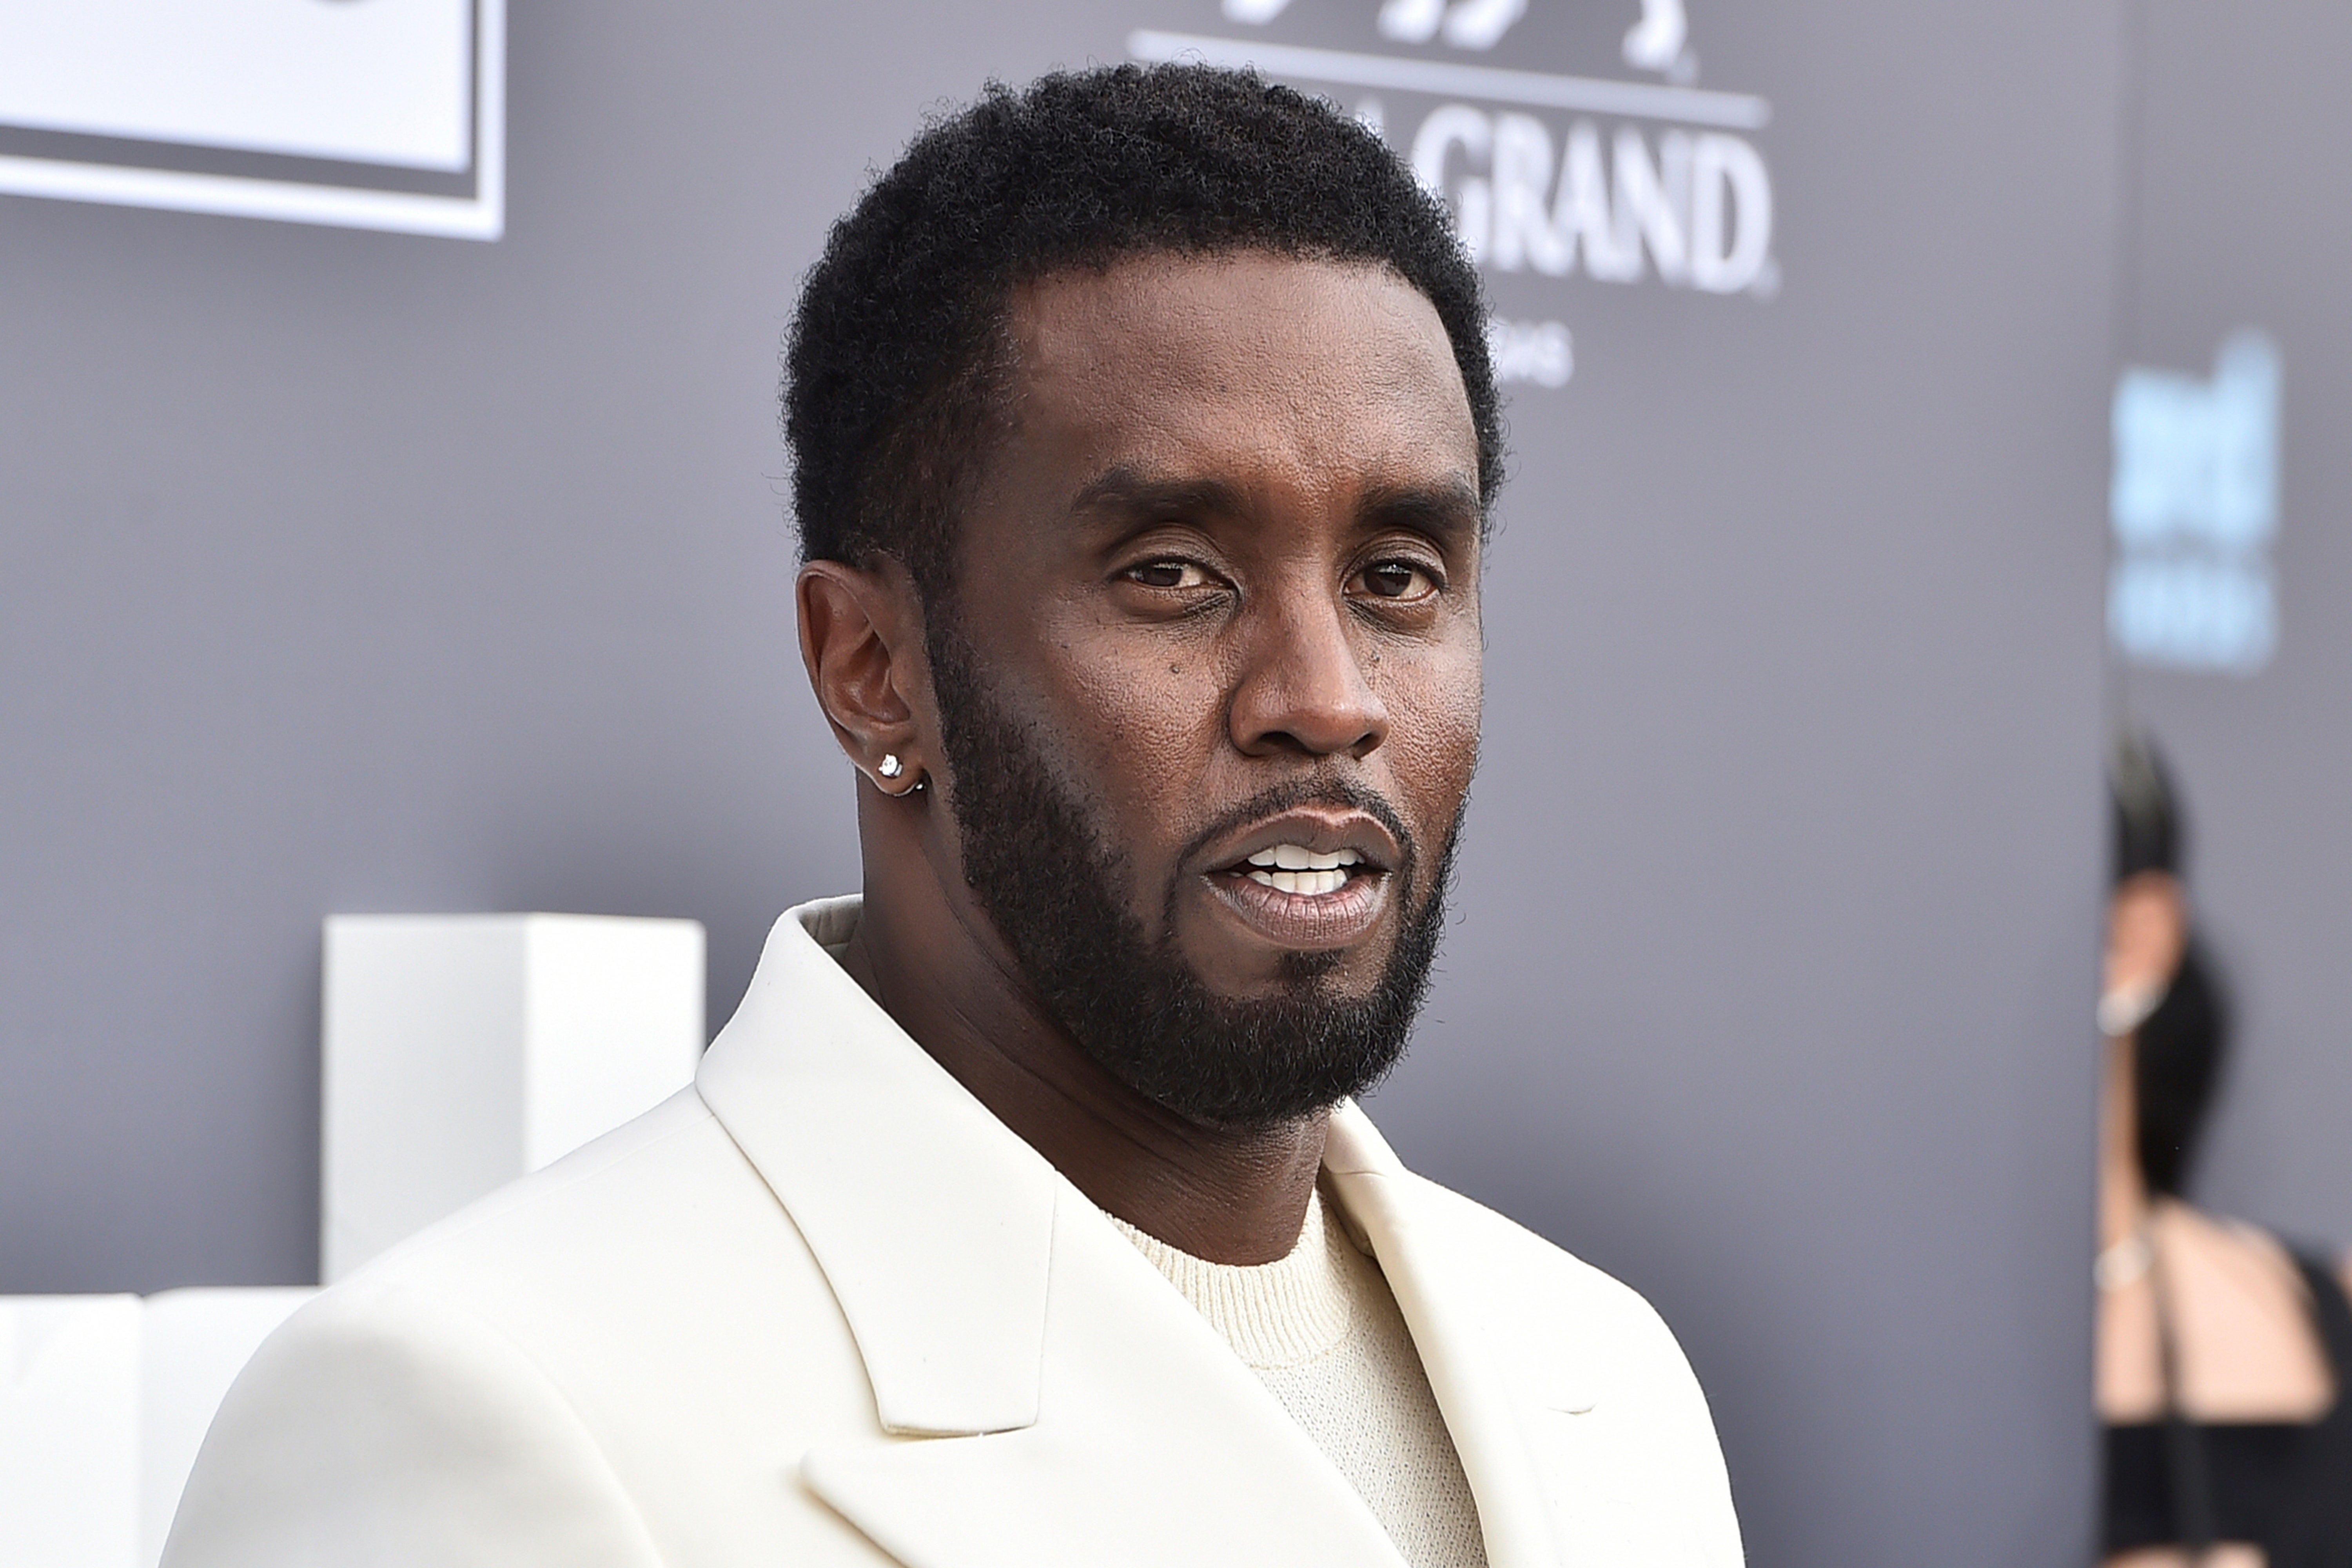 Music mogul and entrepreneur Sean ‘Diddy’ Combs arrives at the Billboard Music Awards on 15 May 2022